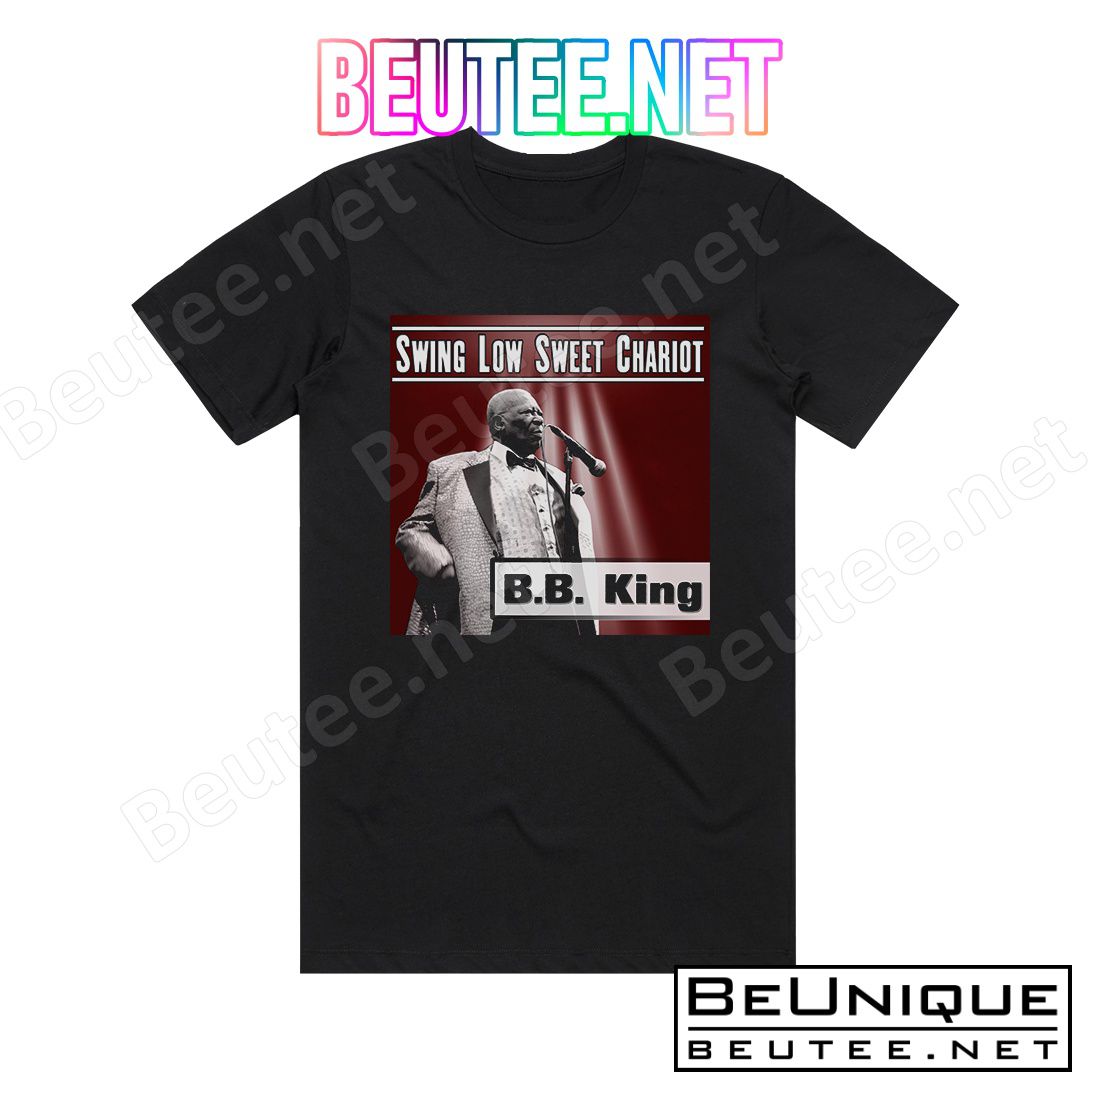 BB King Swing Low Sweet Chariot Album Cover T-Shirt